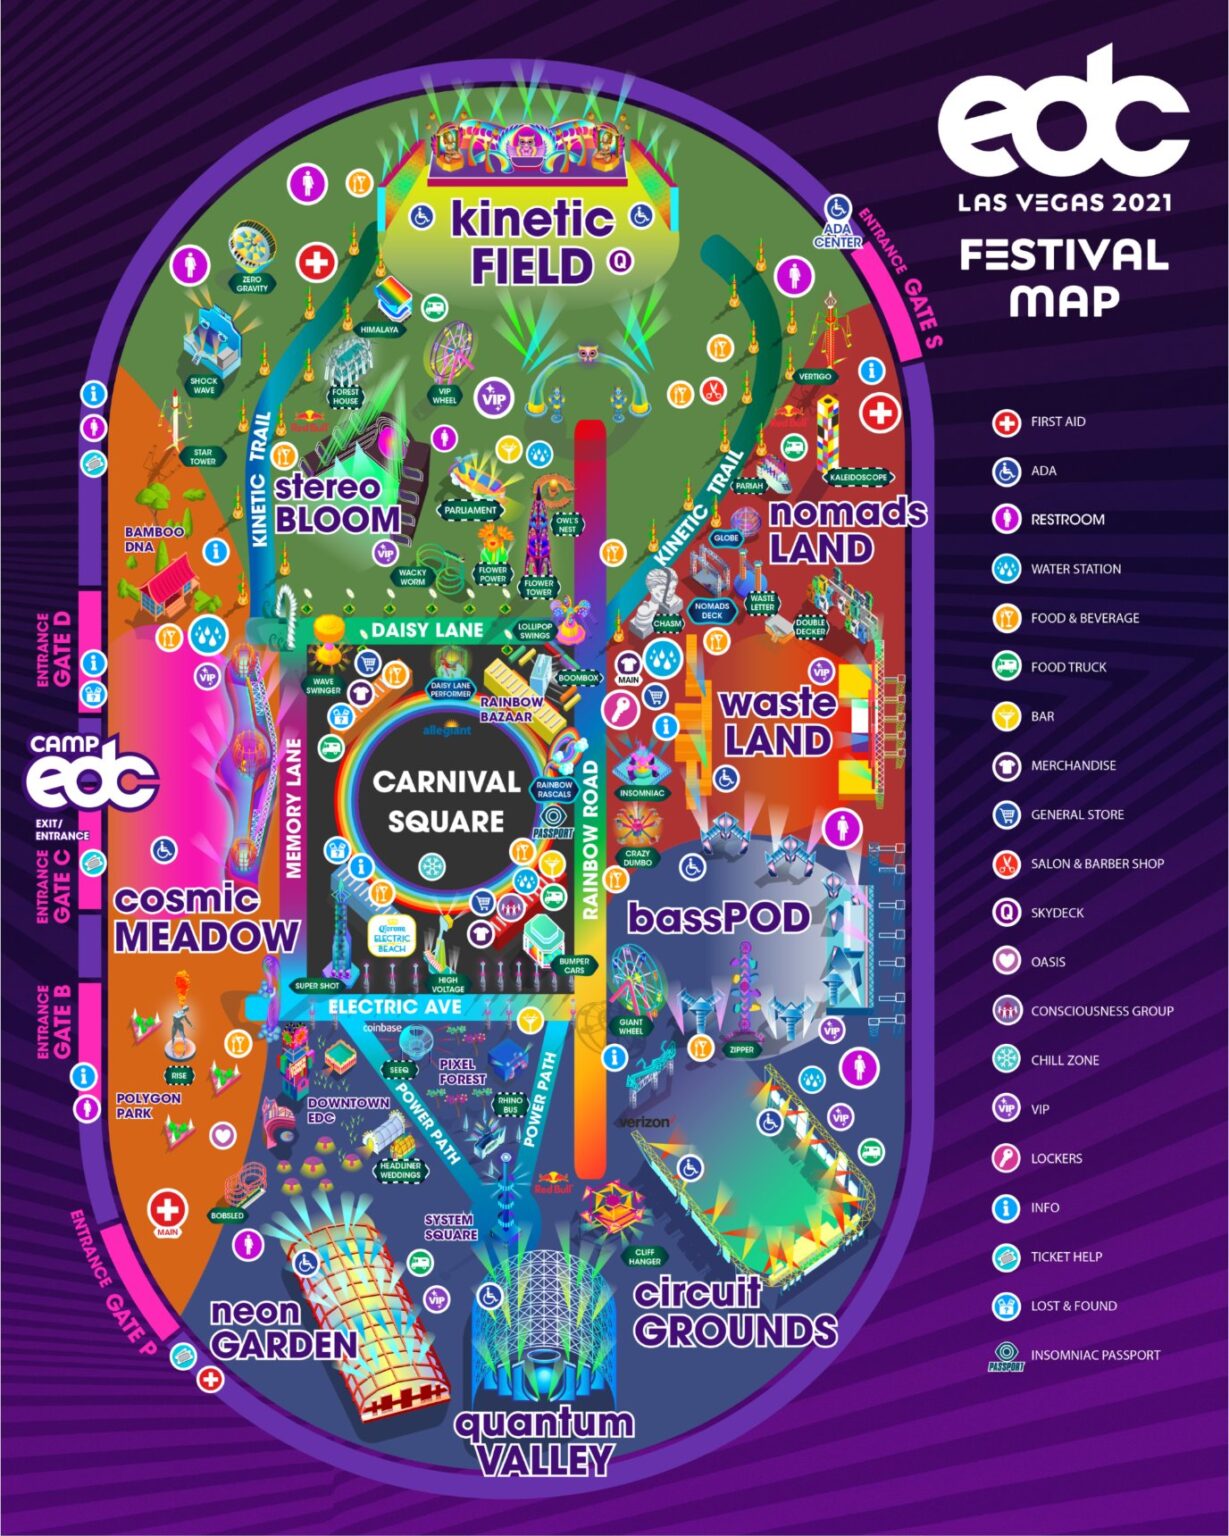 Get familiar with EDC’s layout with 2021 festival and camping maps